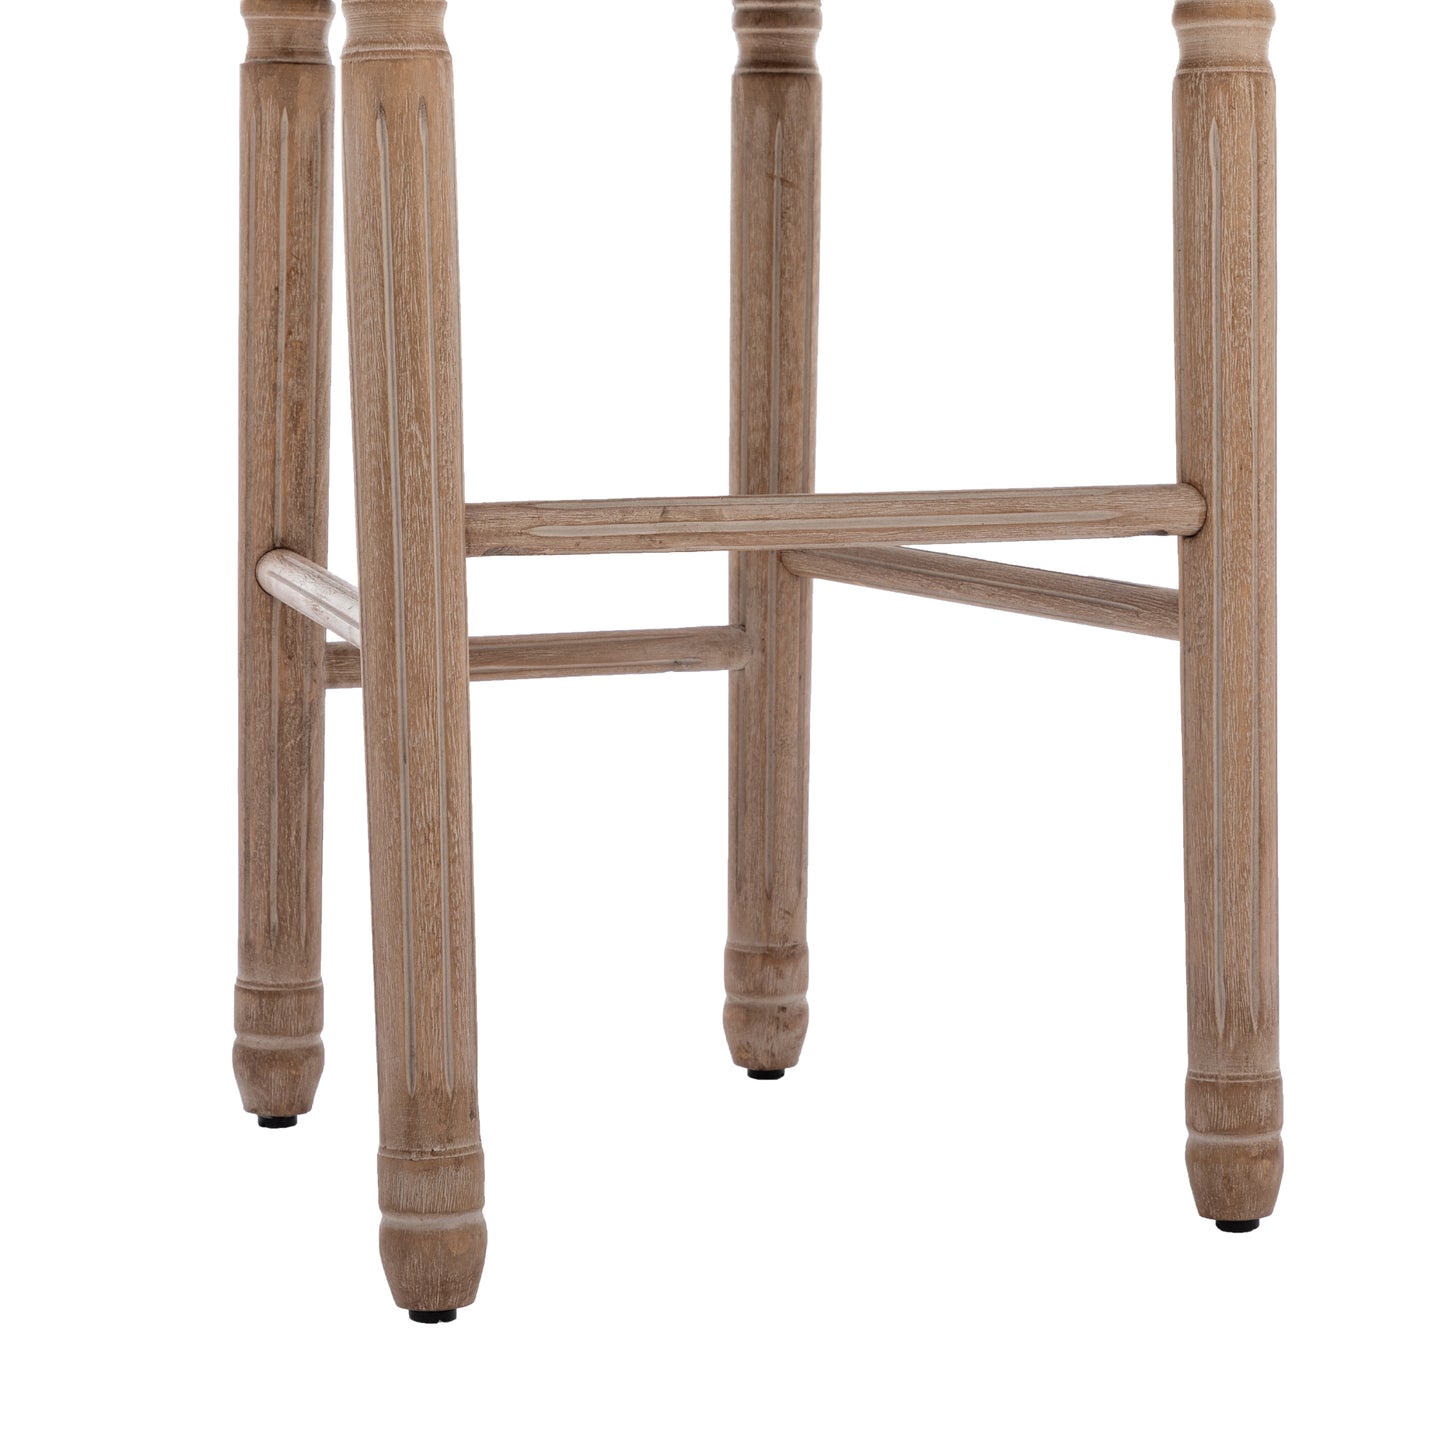 French Country Counter&Bar Stools Set of 2 W21236873